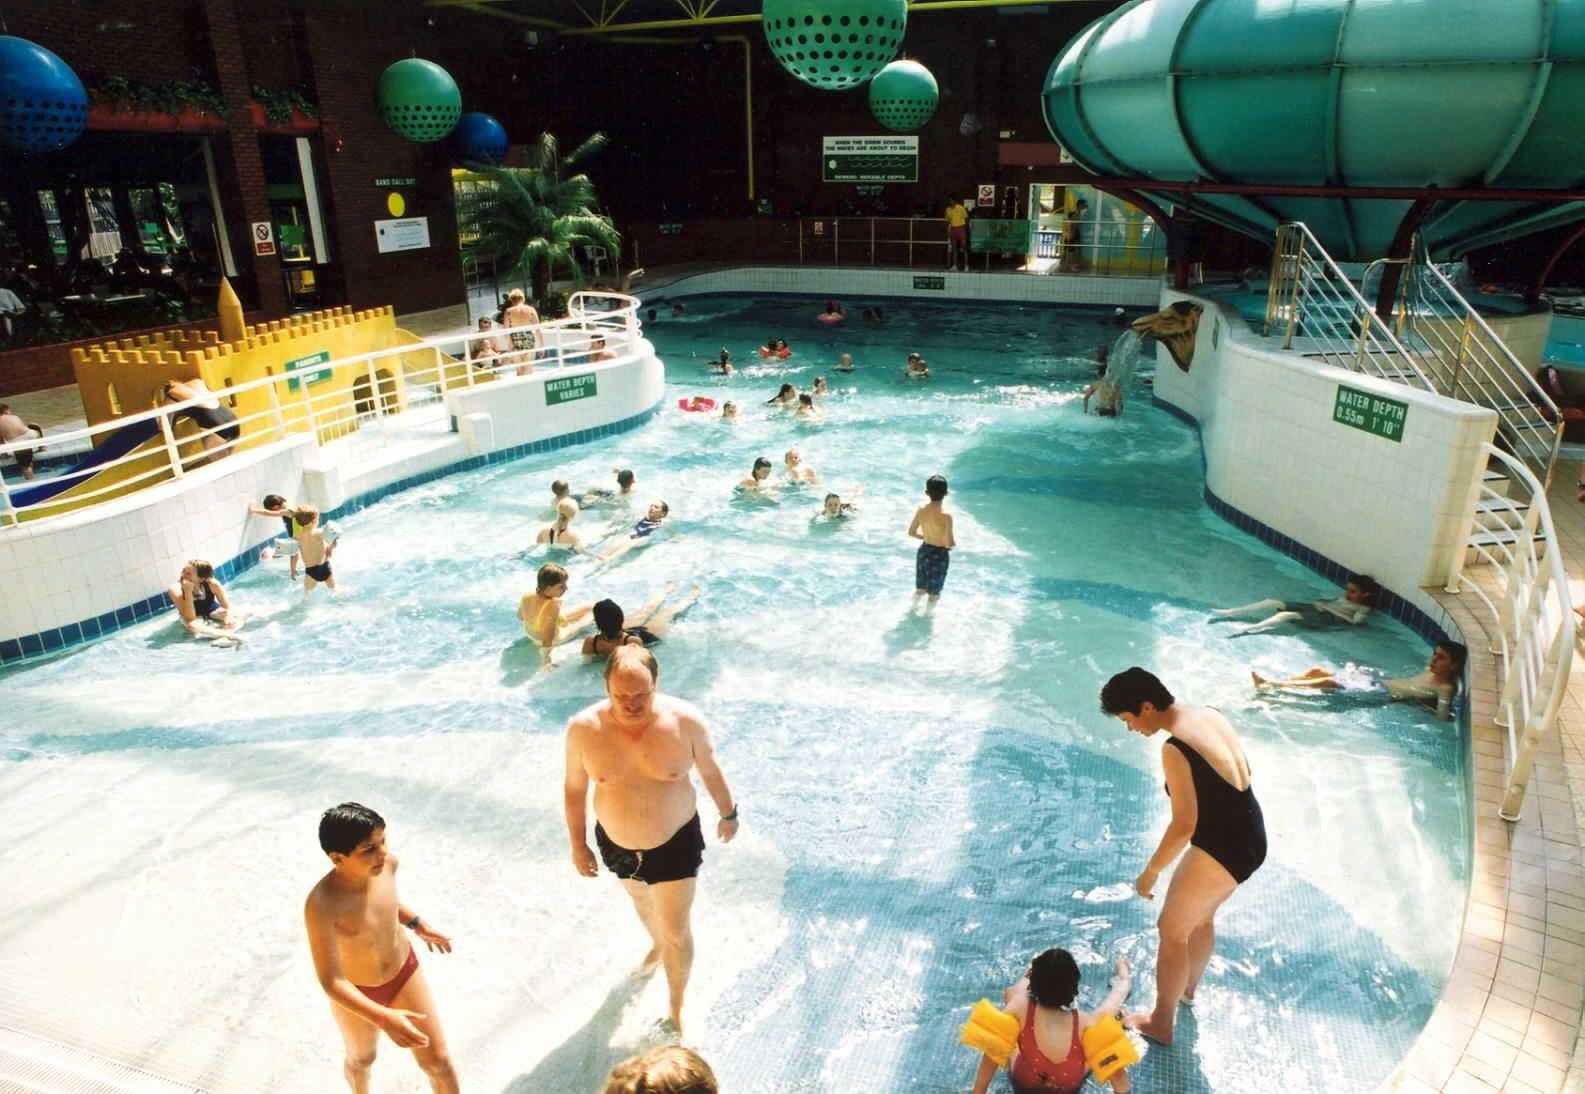 The swimming pool at Larkfield leisure Centre in 1999